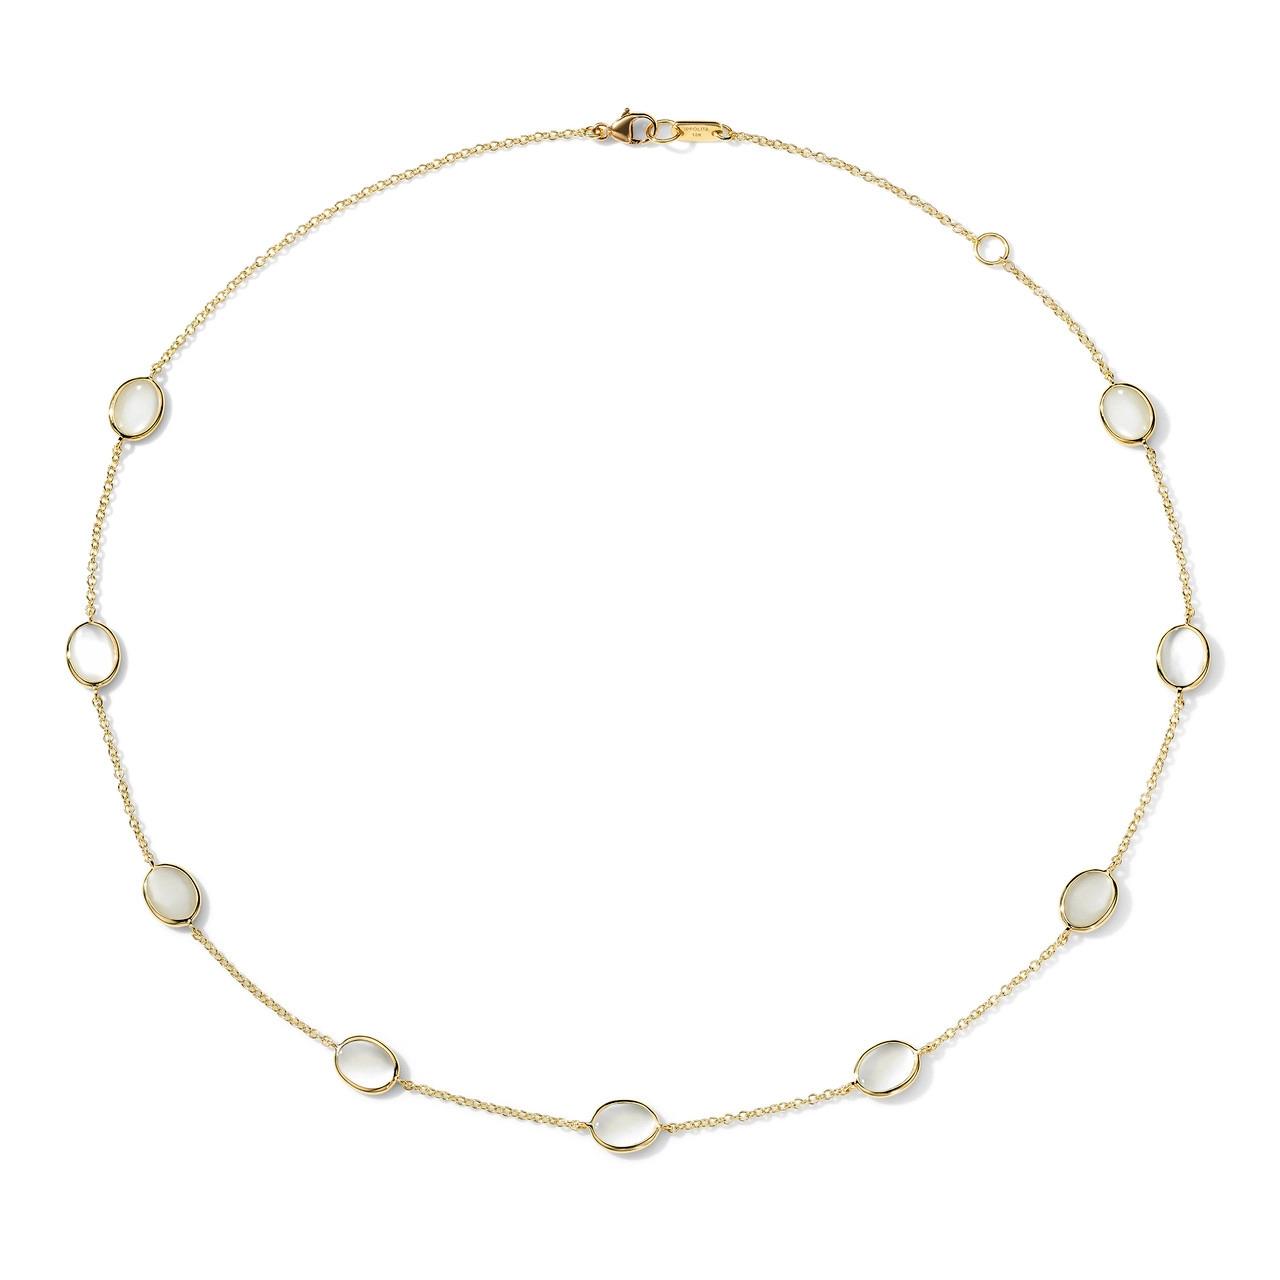 Ippolita 18k Polished Rock Candy Confetti Mother of Pearl Slice Necklace 0